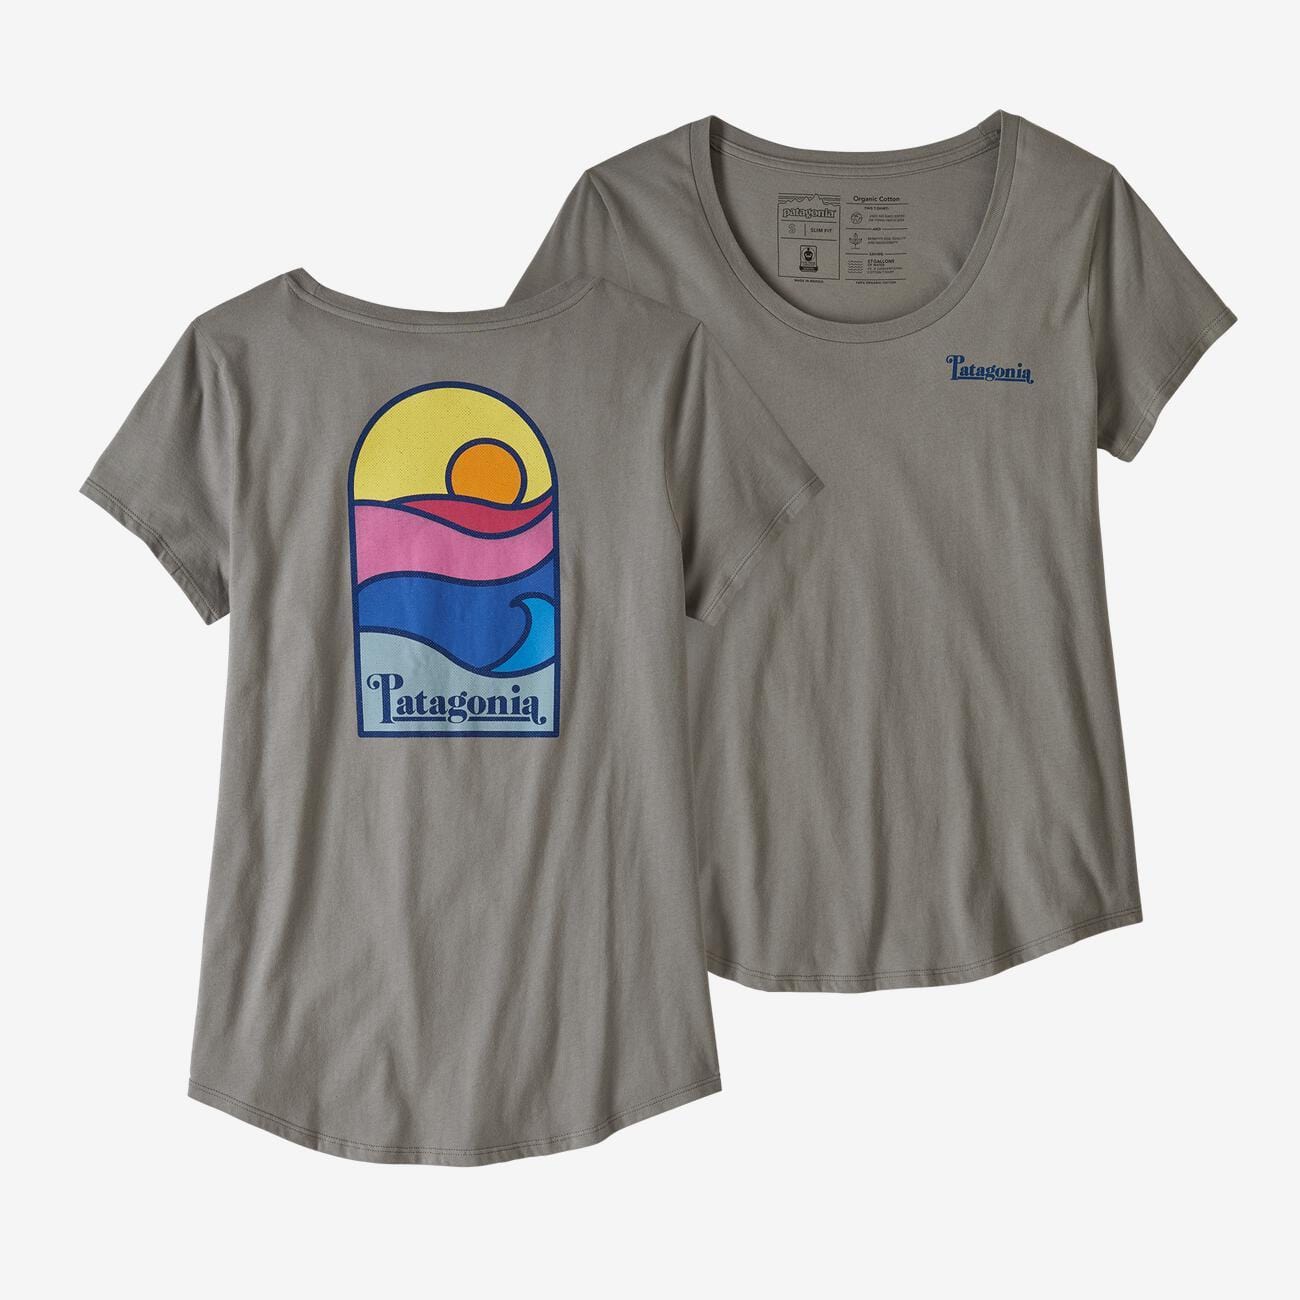  Small Patagonia, Women's Sunset Sets Scoop Tee (Multiple Colors)